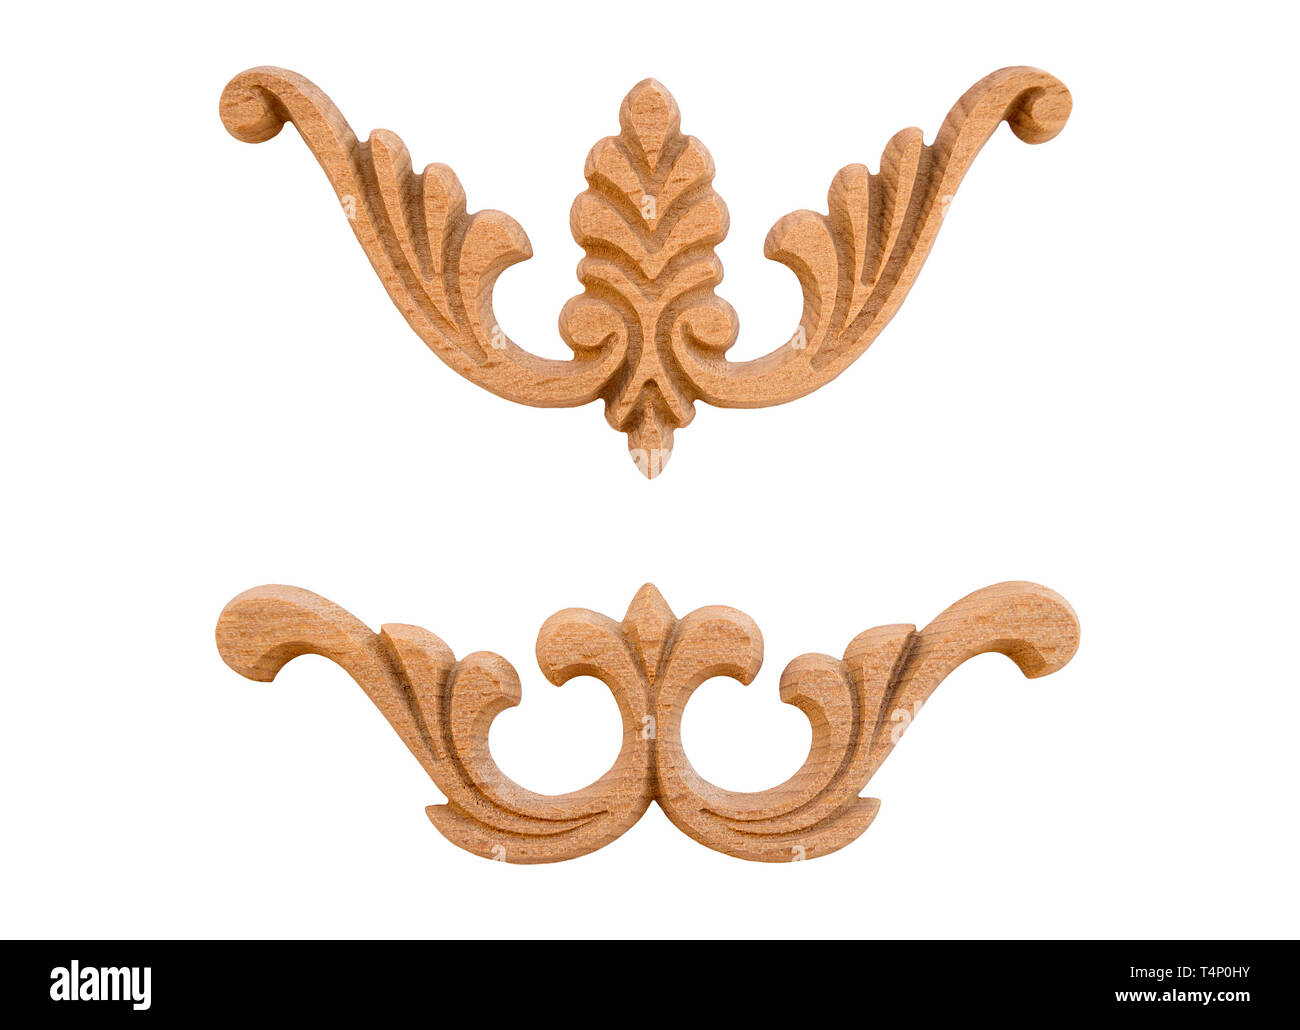 Elements woodcarving on white Stock Photo